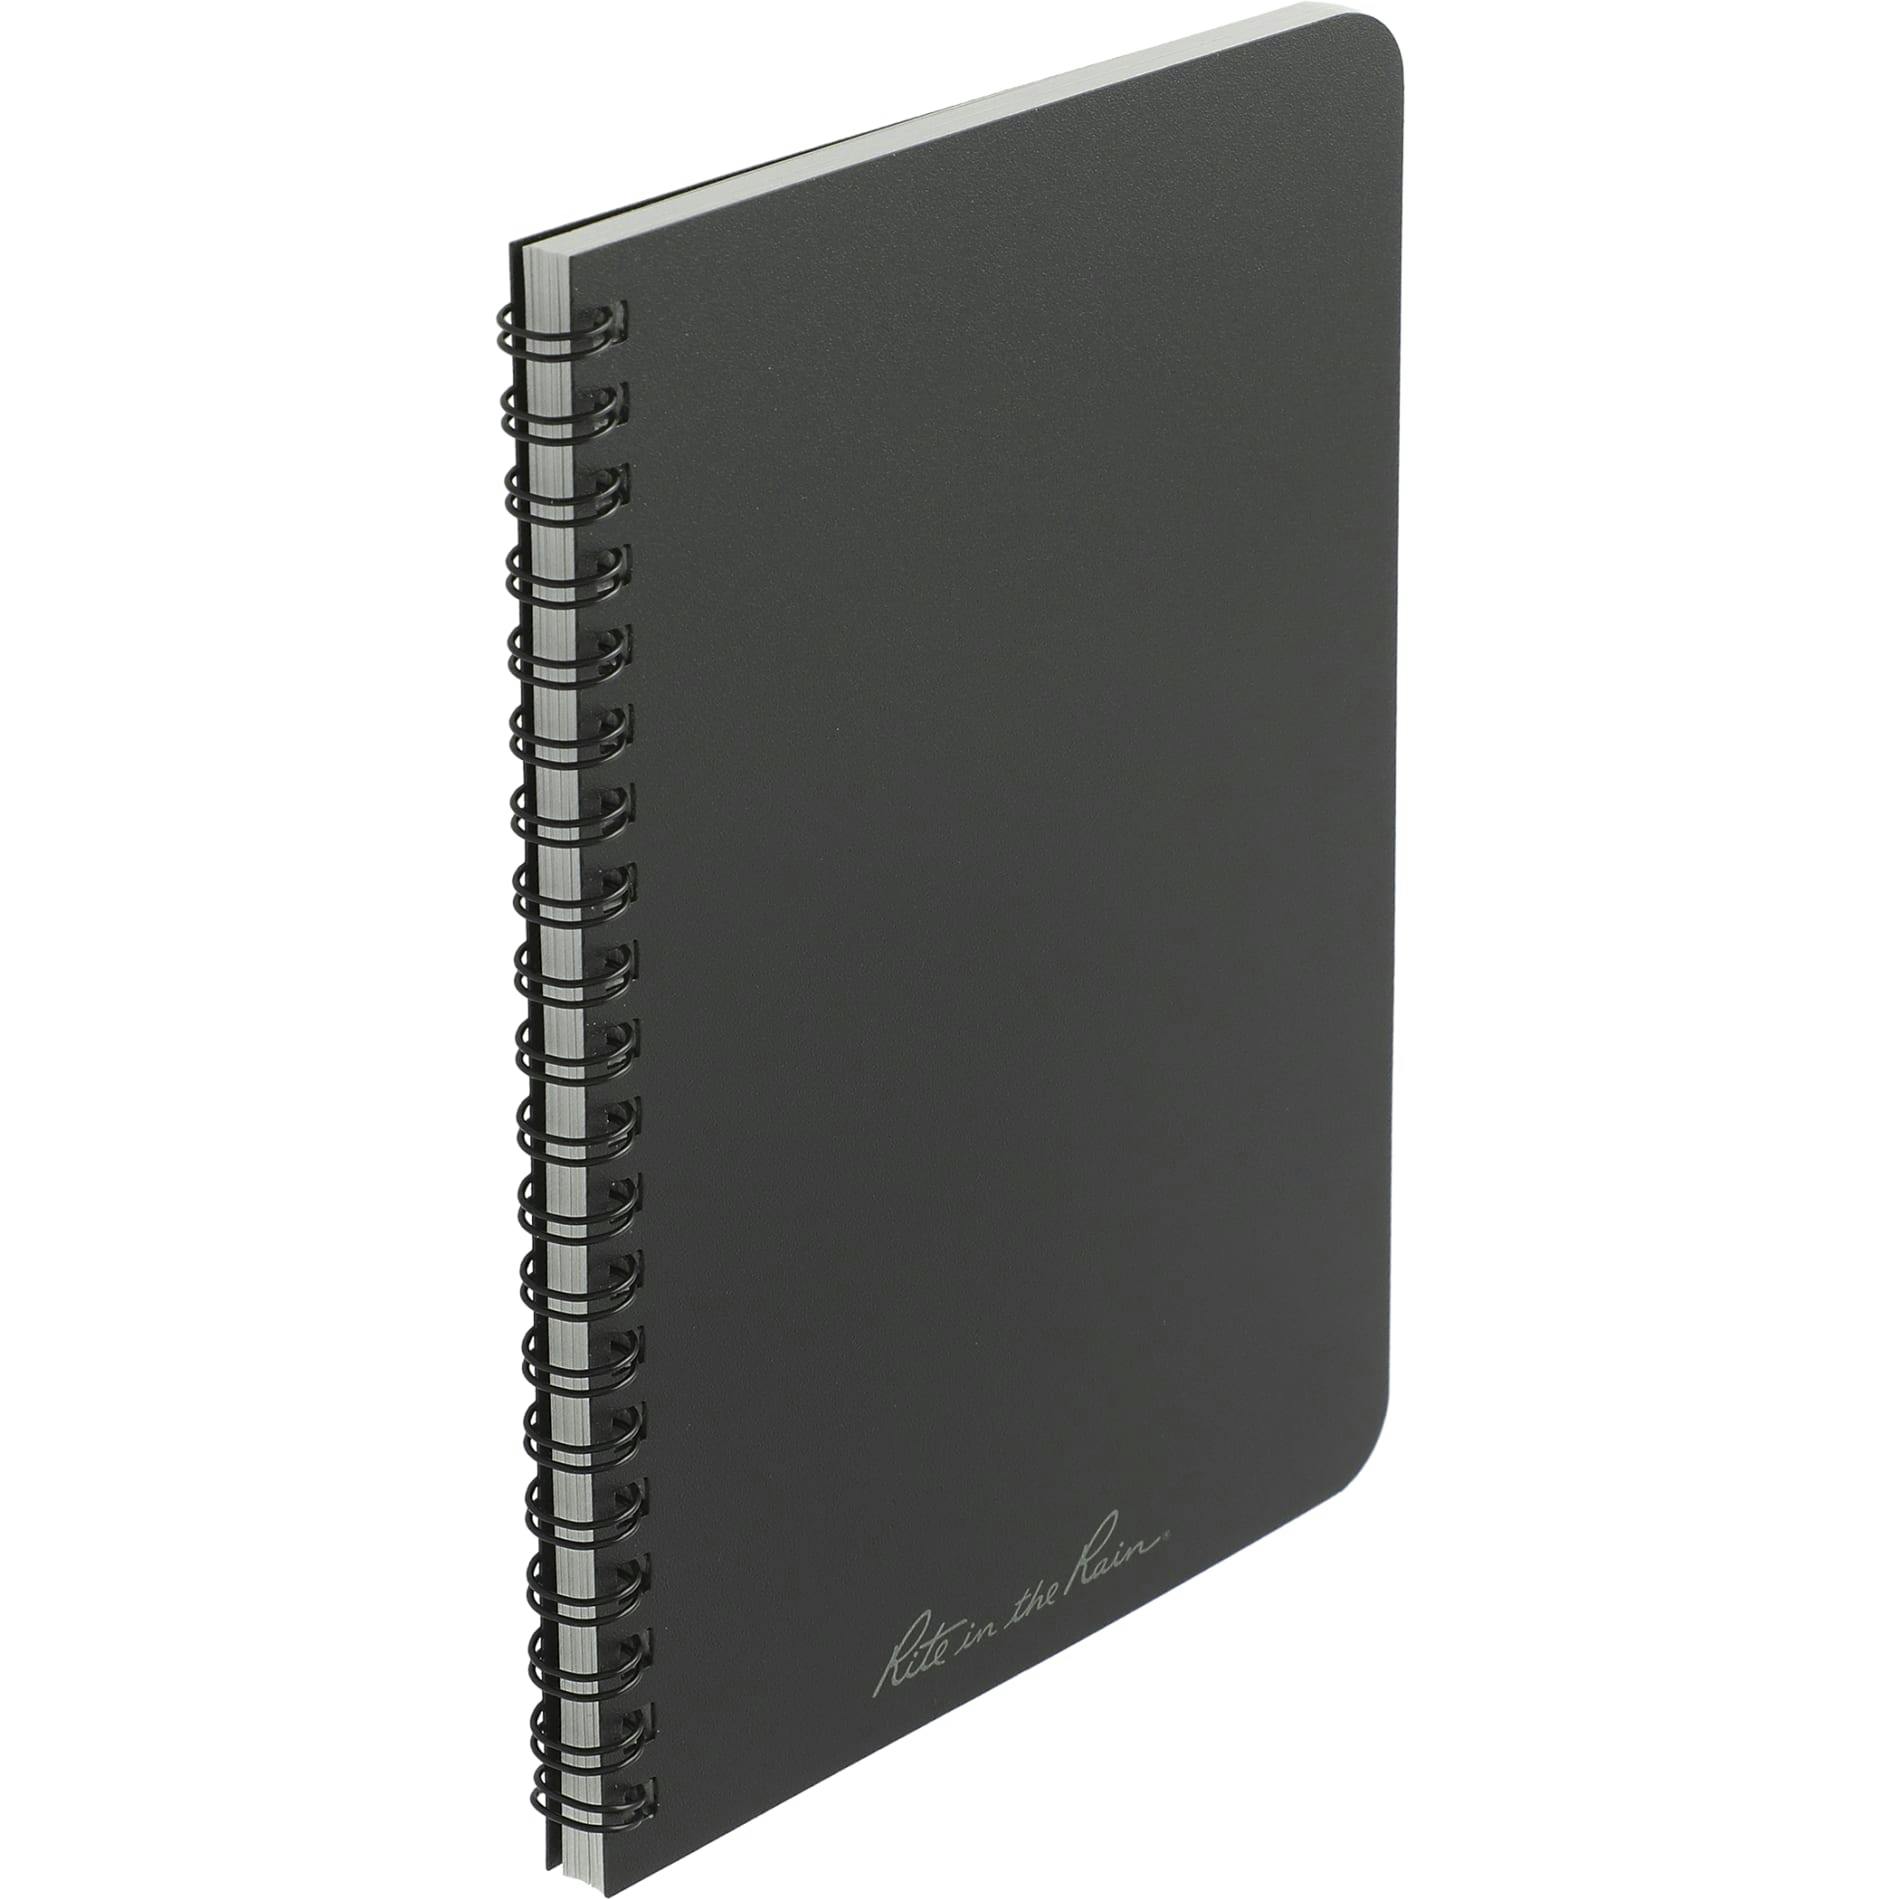 4.6” x 7” Rite in the Rain Side Spiral Notebook - additional Image 2